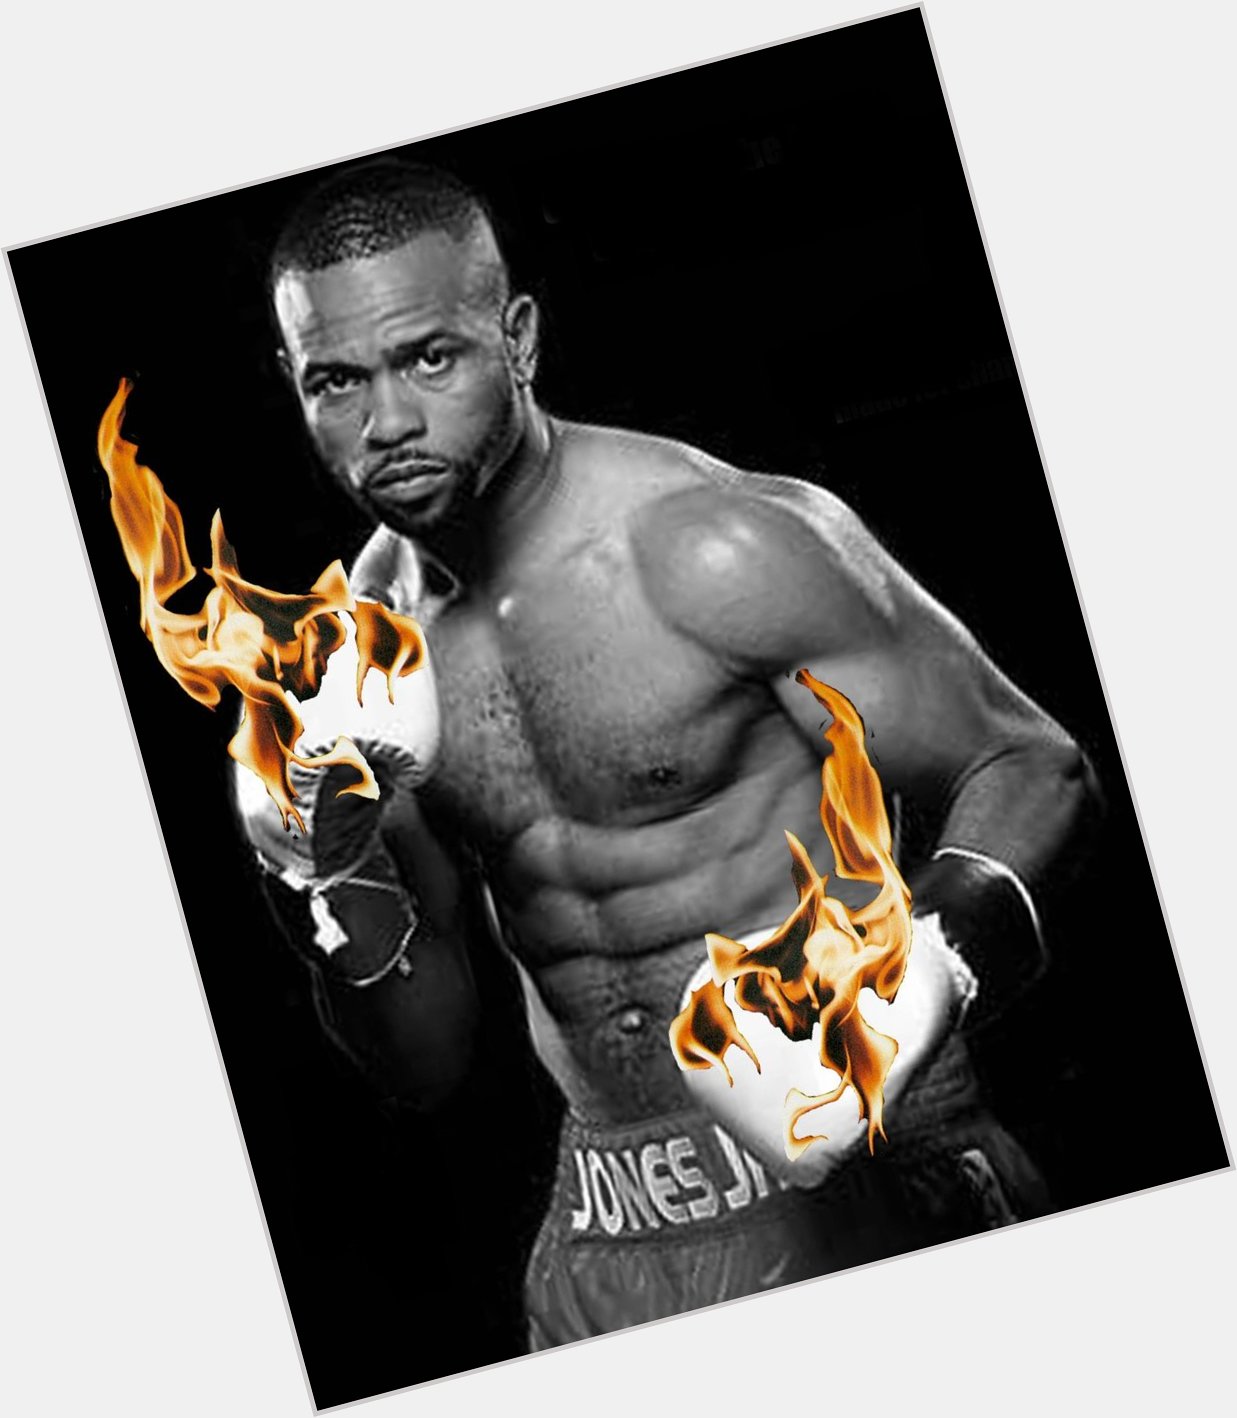 Happy birthday to two of the s - the Sadé, the P4P great Roy Jones Jr ..............

(and me) 